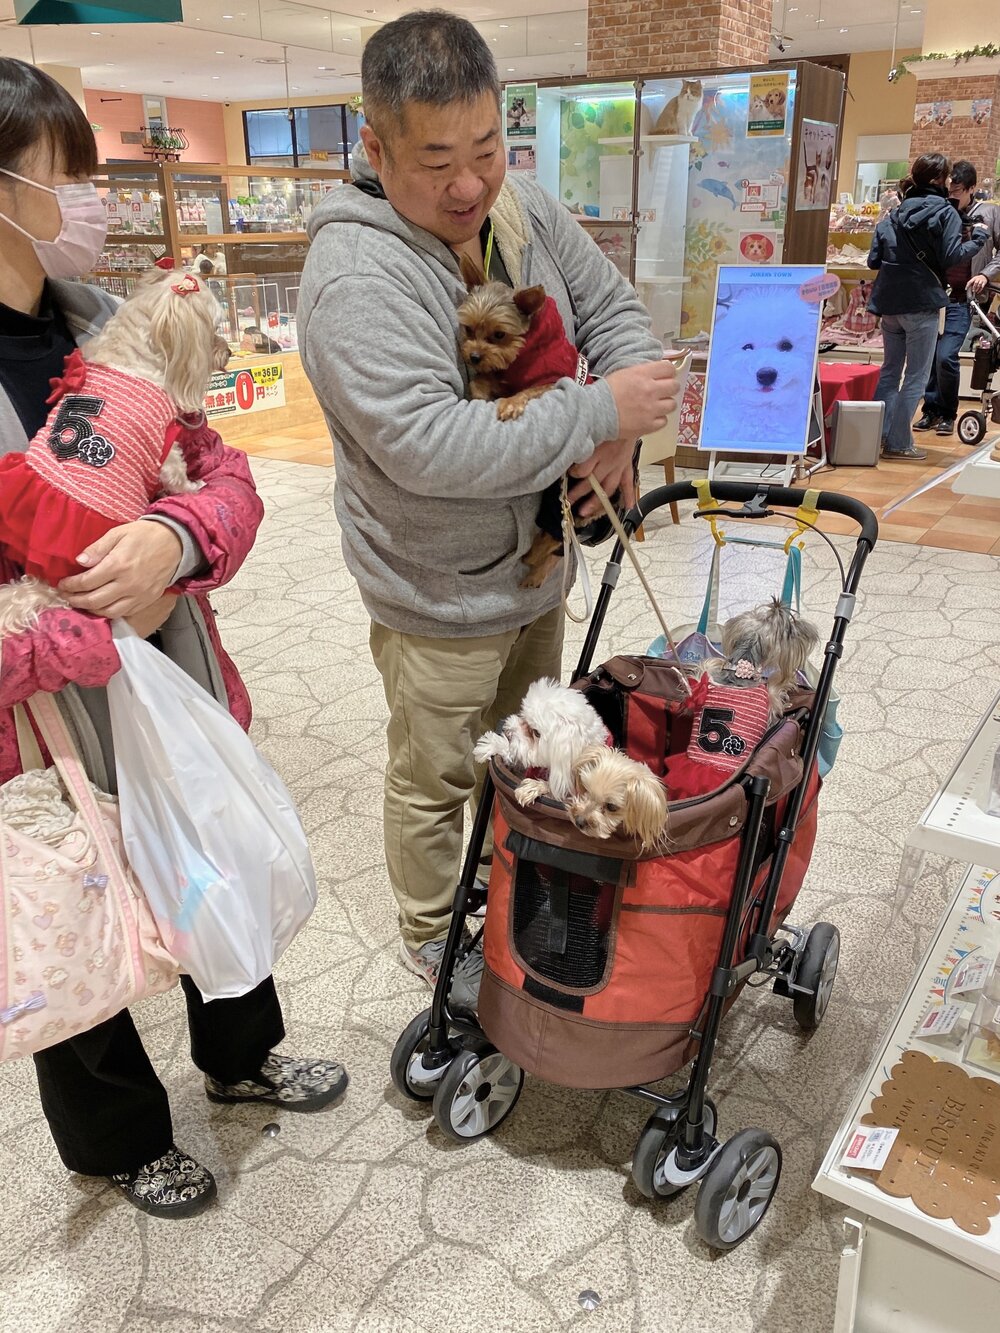 #goals: a fam w many tiny dogs in a stroller